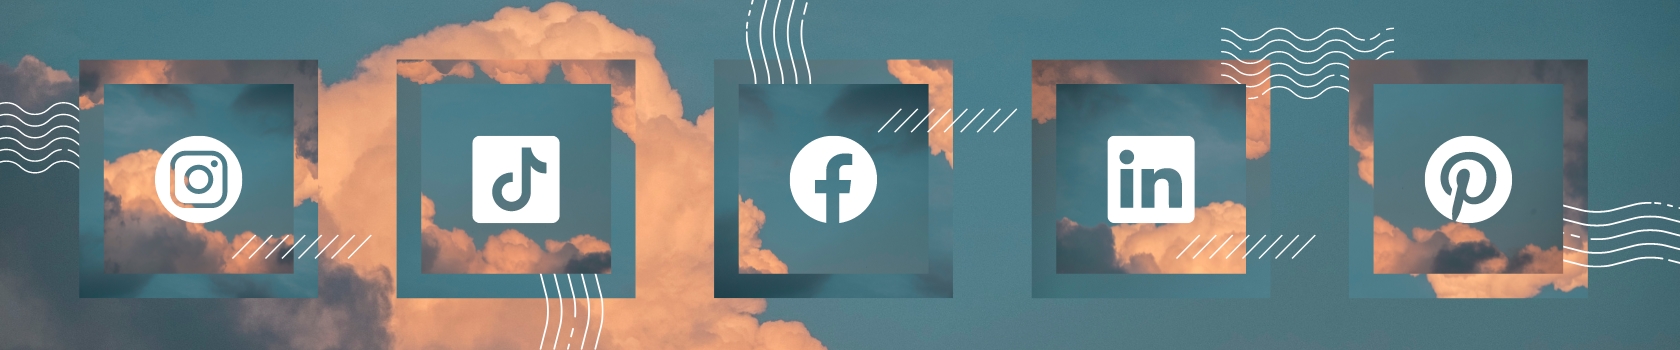 social media icons floating in clouds